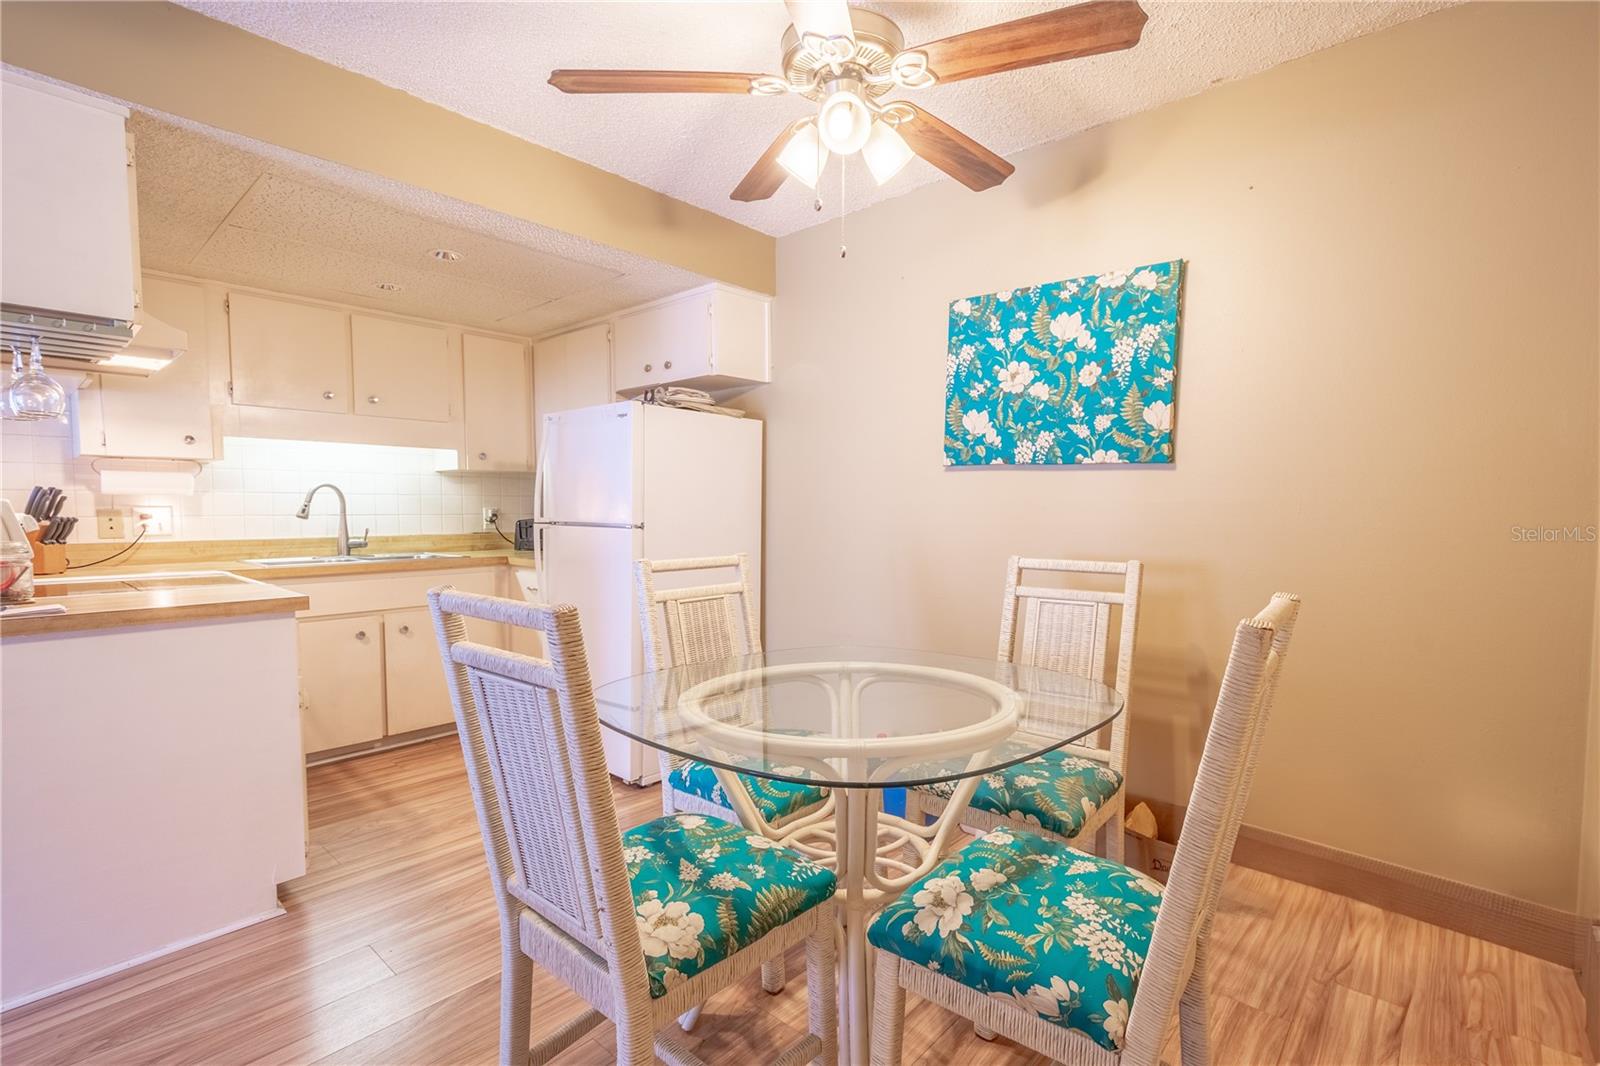 The kitchen has room for your dining table, illuminated by a ceiling fan with a light kit.